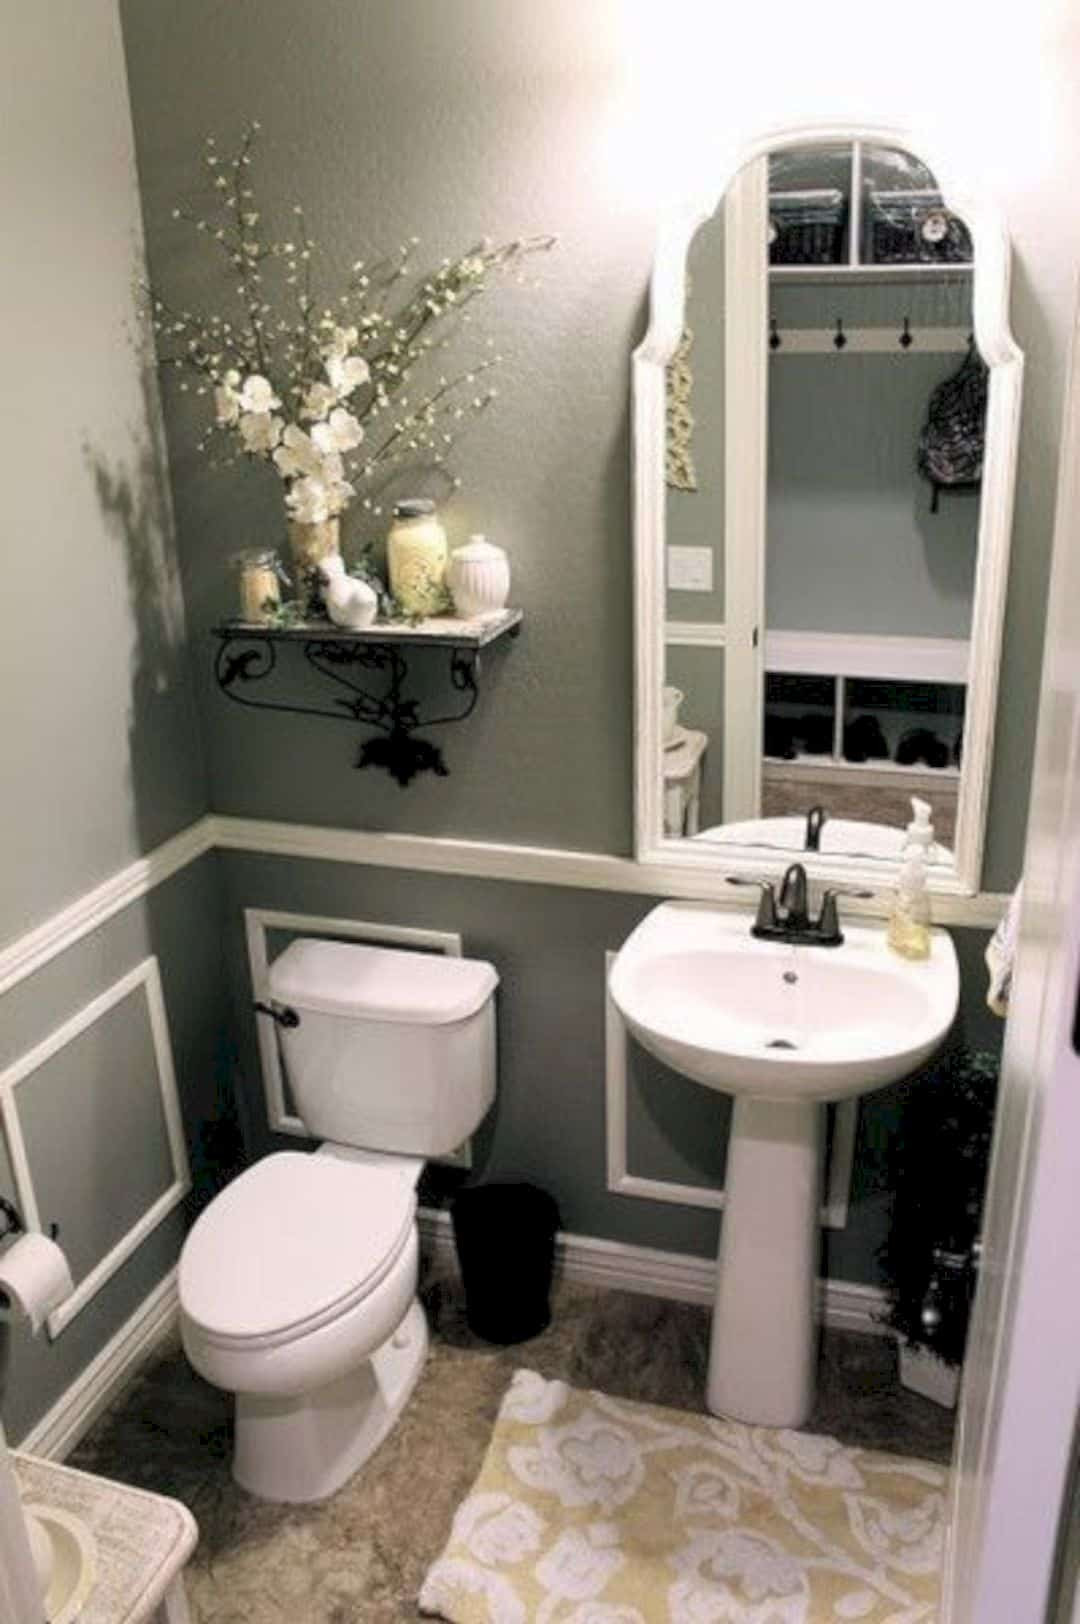 Small Bathroom Decorating Ideas
 17 Awesome Small Bathroom Decorating Ideas